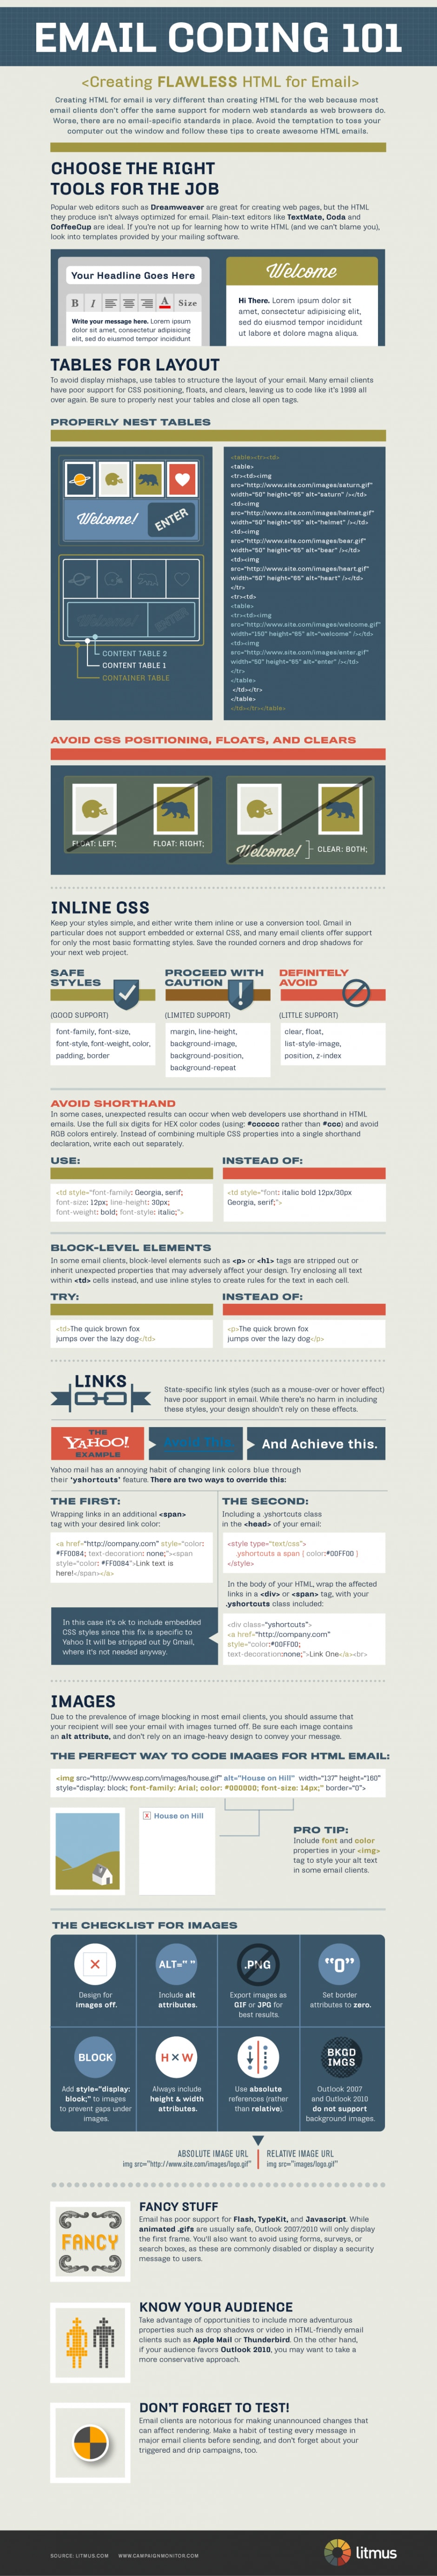 HTML Email Code 101: A Guide For Email Marketing [Infographic]